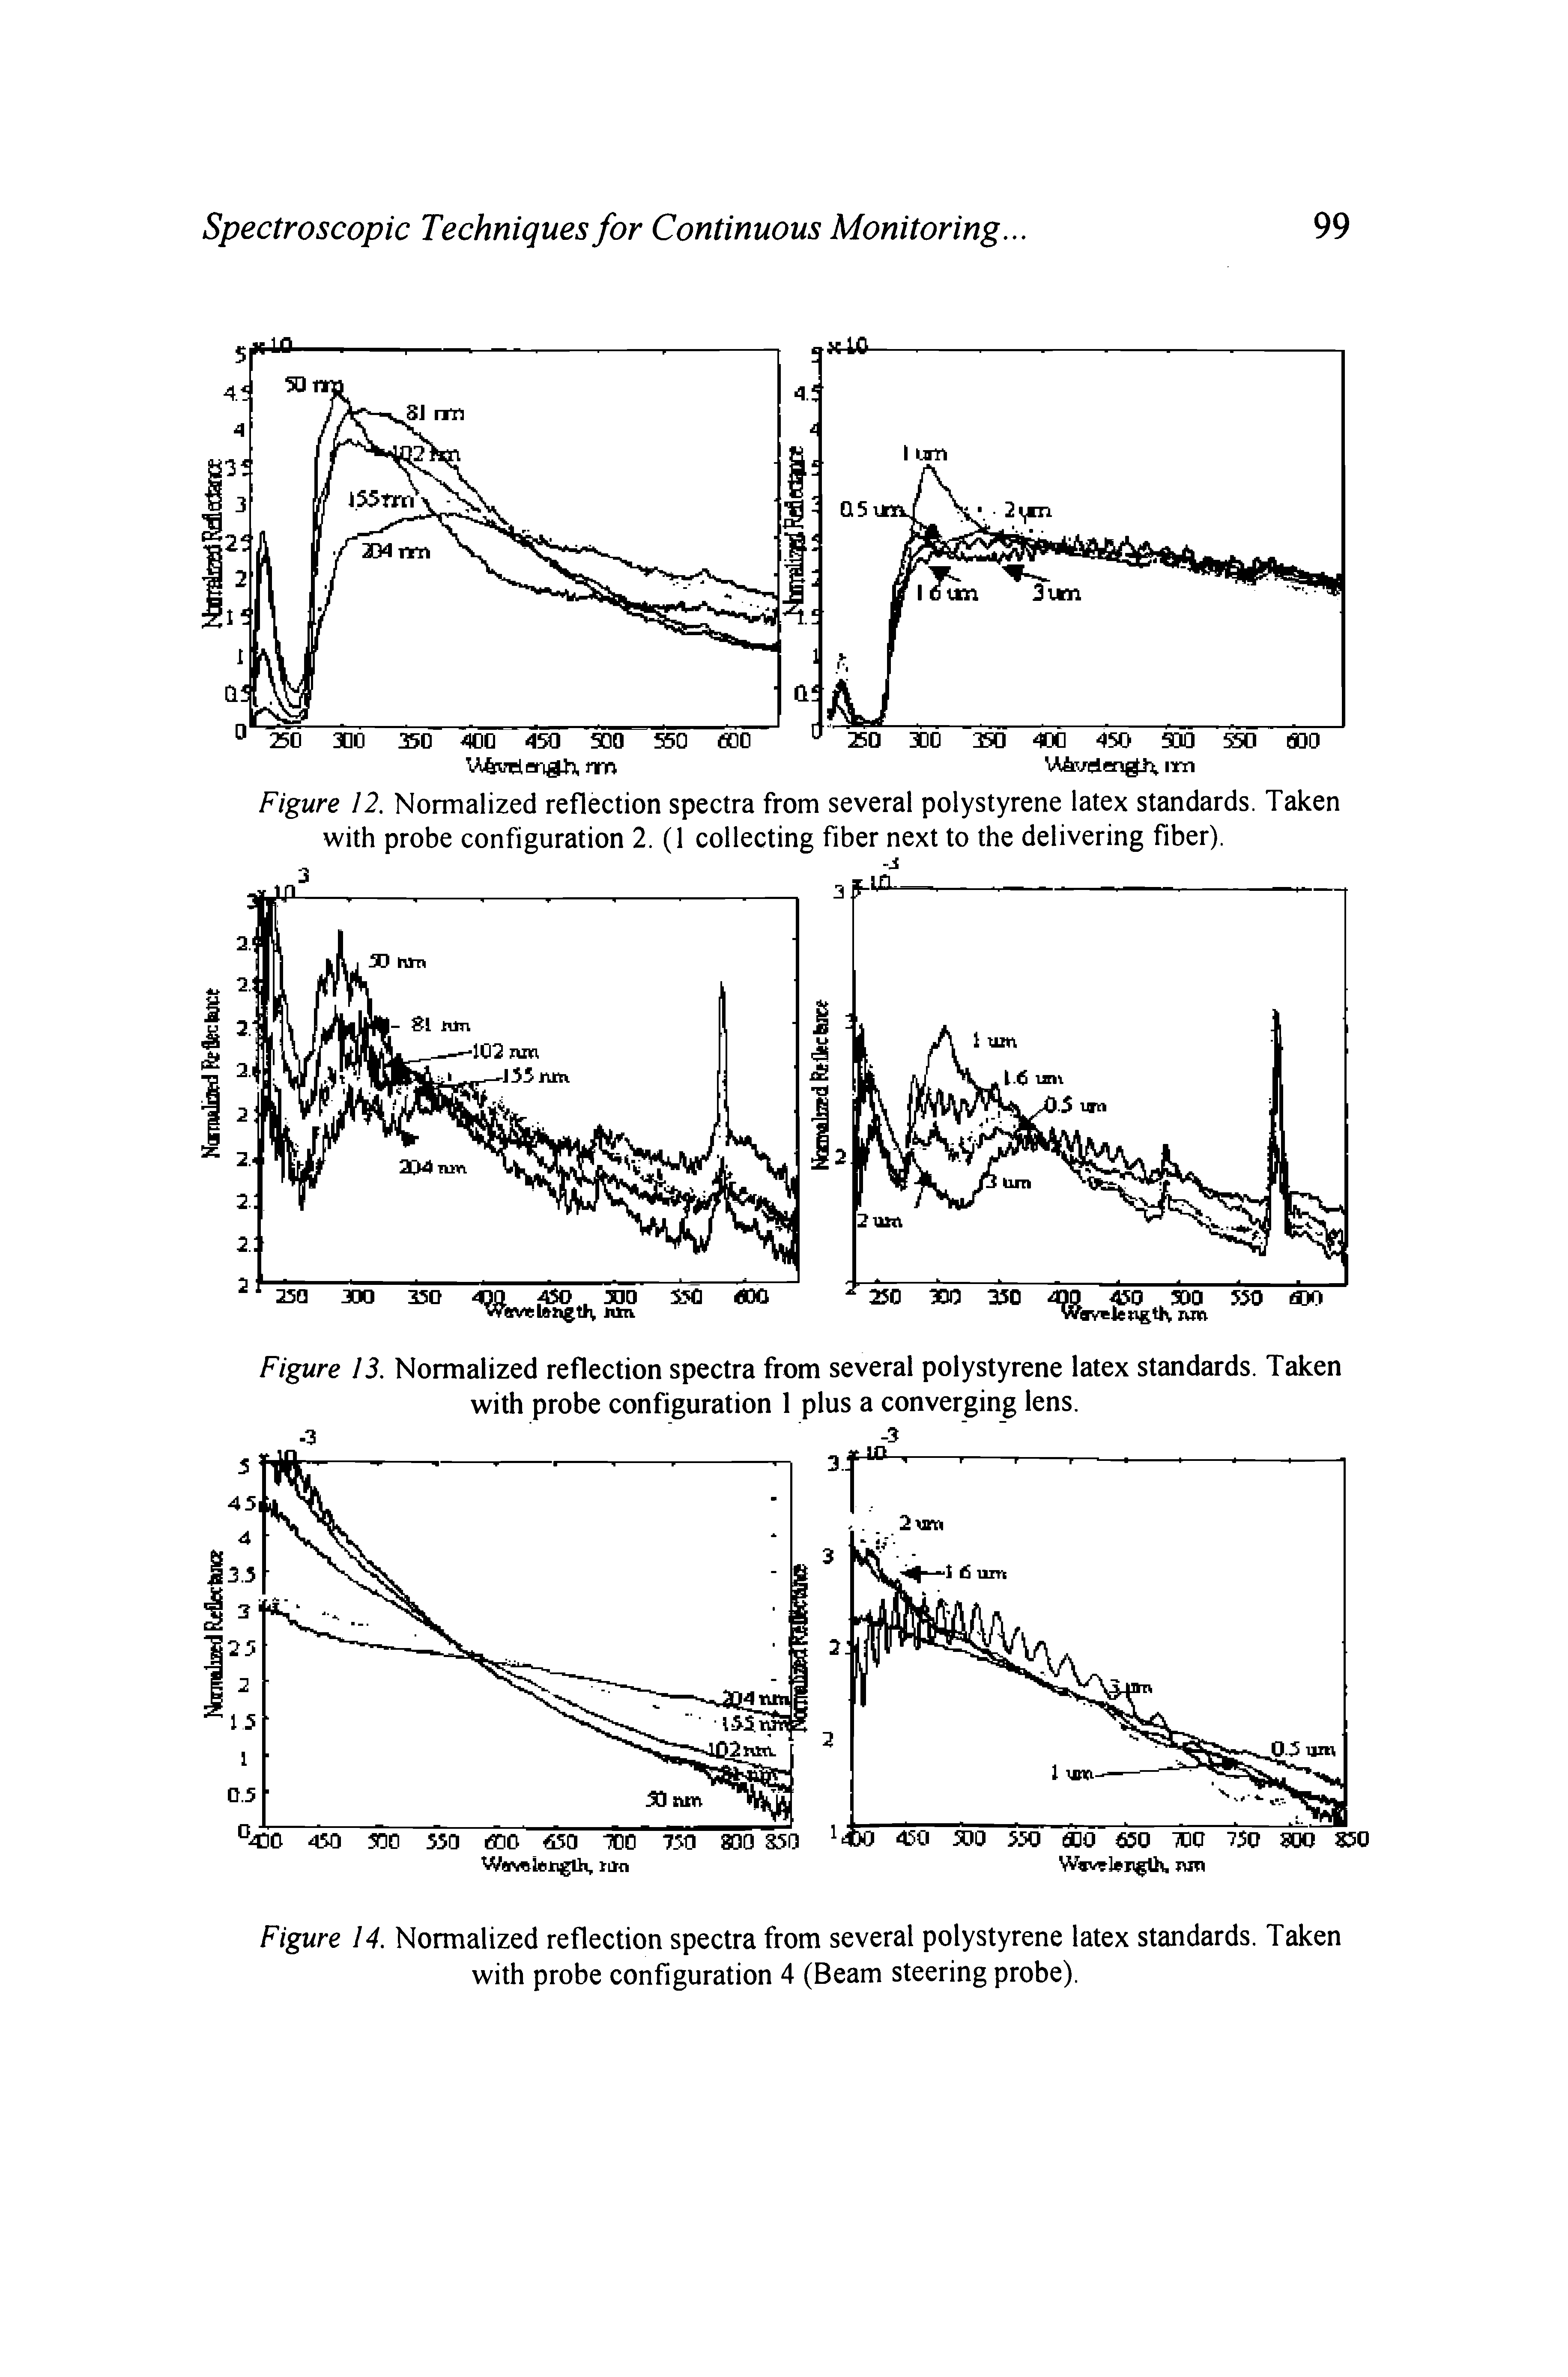 Figure 12. Normalized reflection spectra from several polystyrene latex standards. Taken with probe configuration 2. (1 collecting fiber next to the delivering fiber).